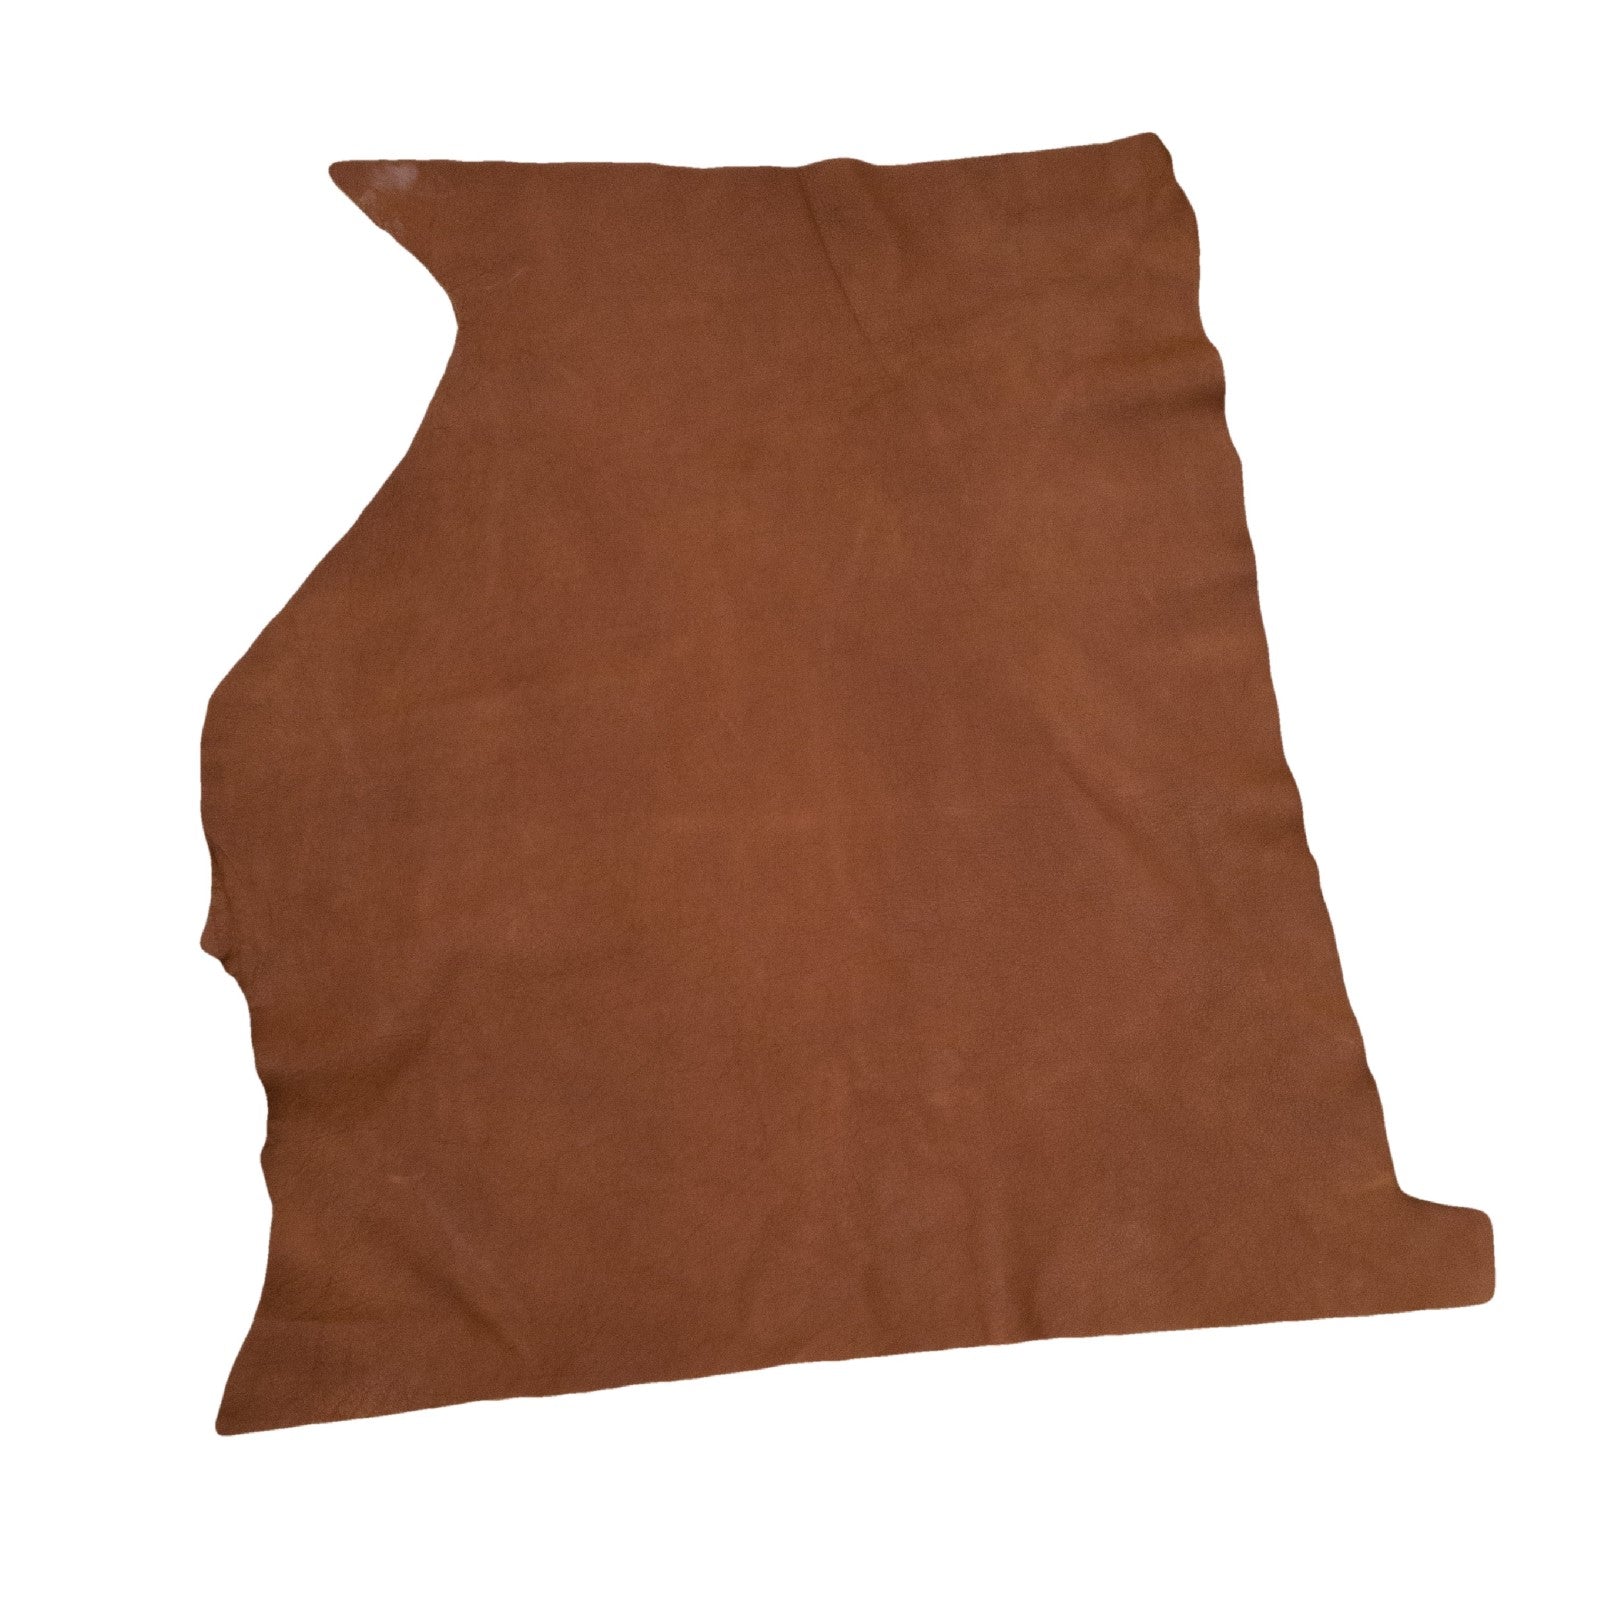 Tarmac Tobacco, 7-9 oz, 12-23 SqFt, Flyin' Bison Sides and Project Pieces, Middle Piece / 6.5-7.5 Sq Ft | The Leather Guy